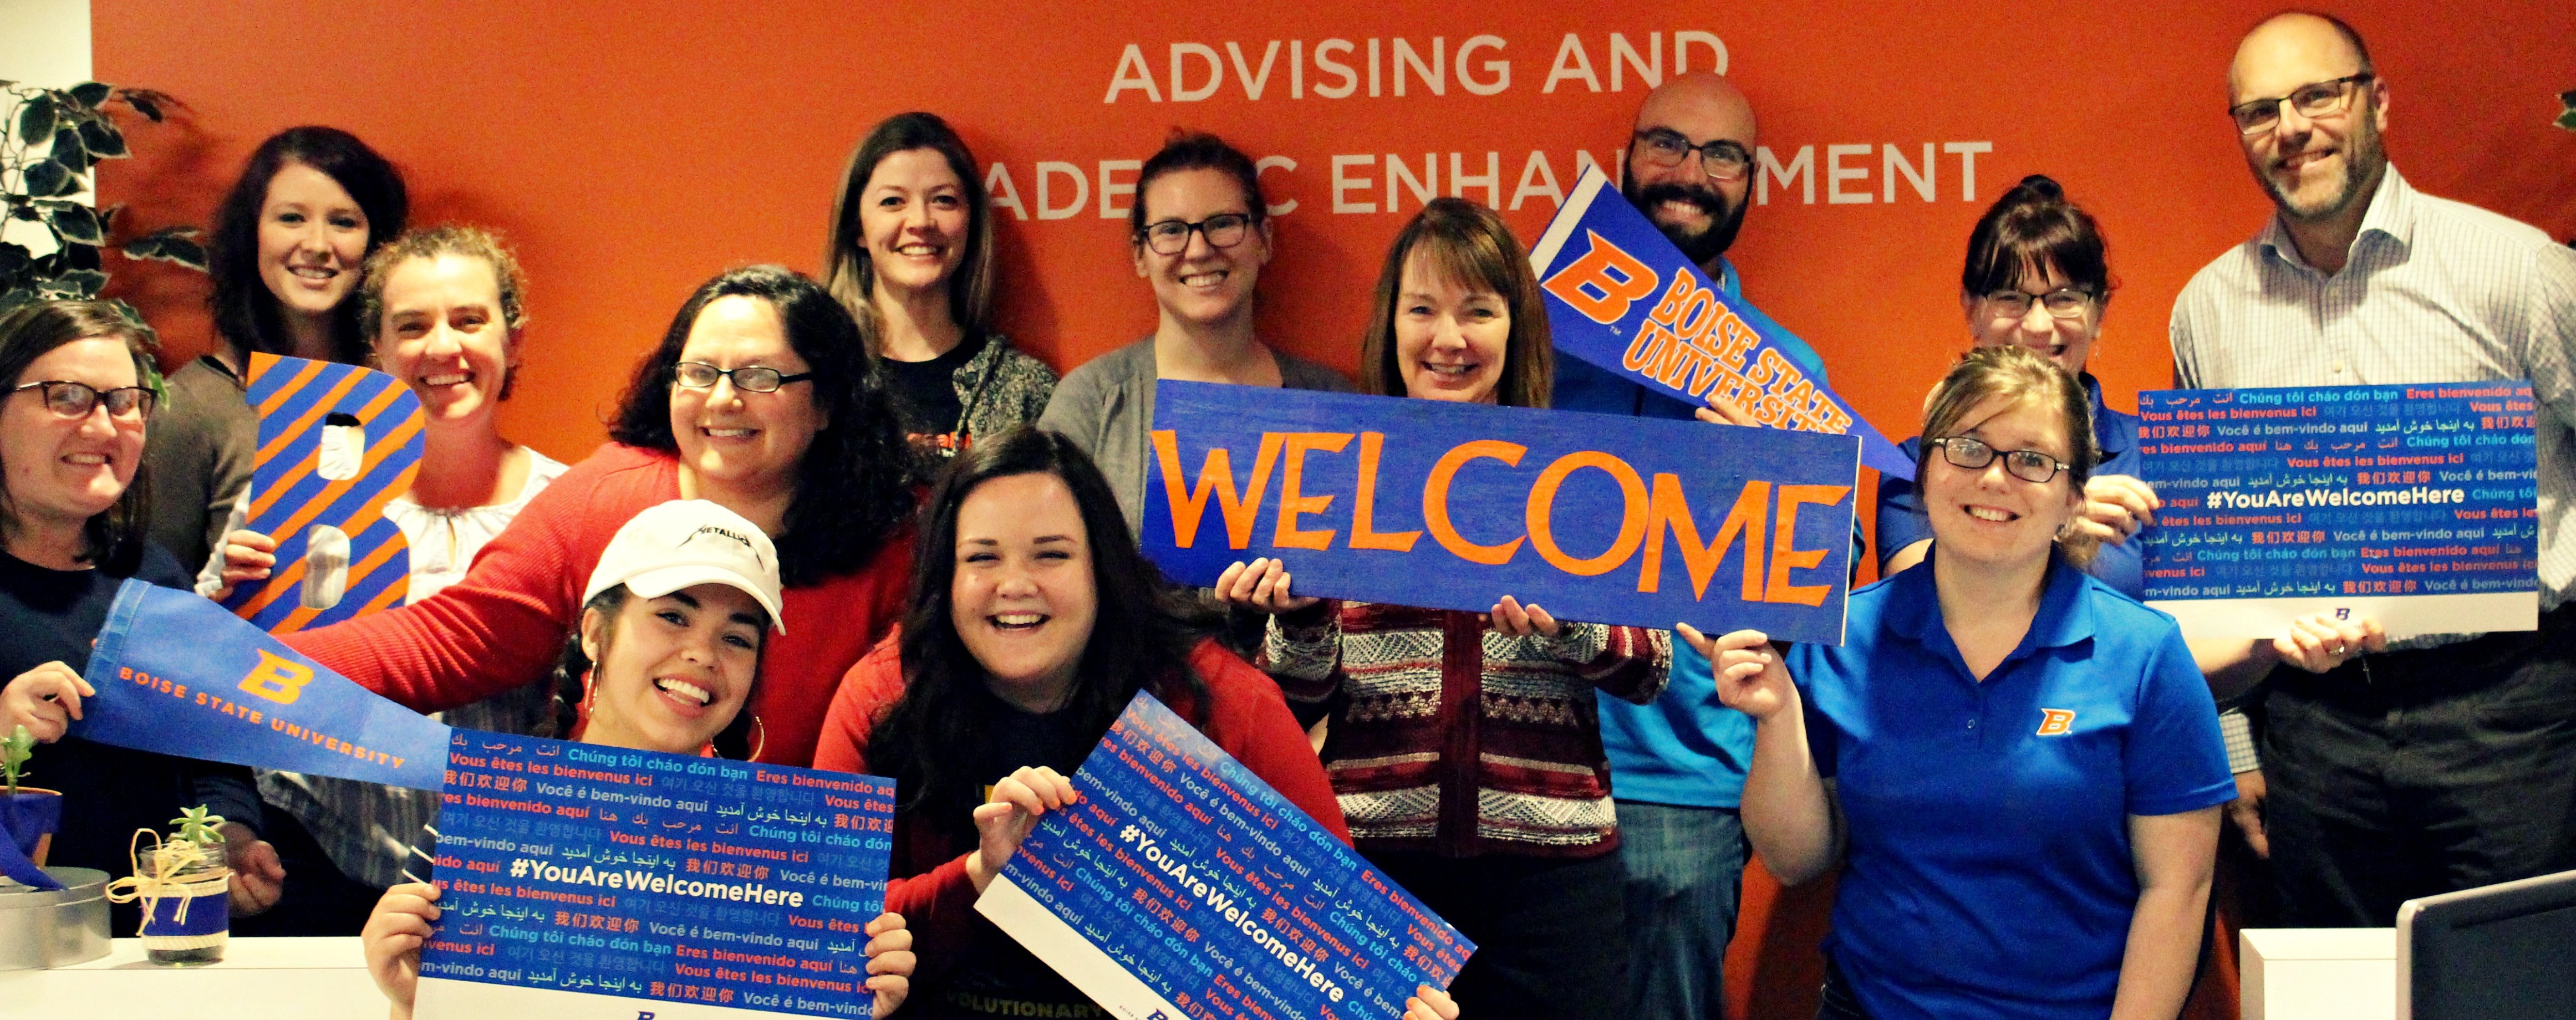 AASC staff pictured together and holding You Are Welcome Here signs.